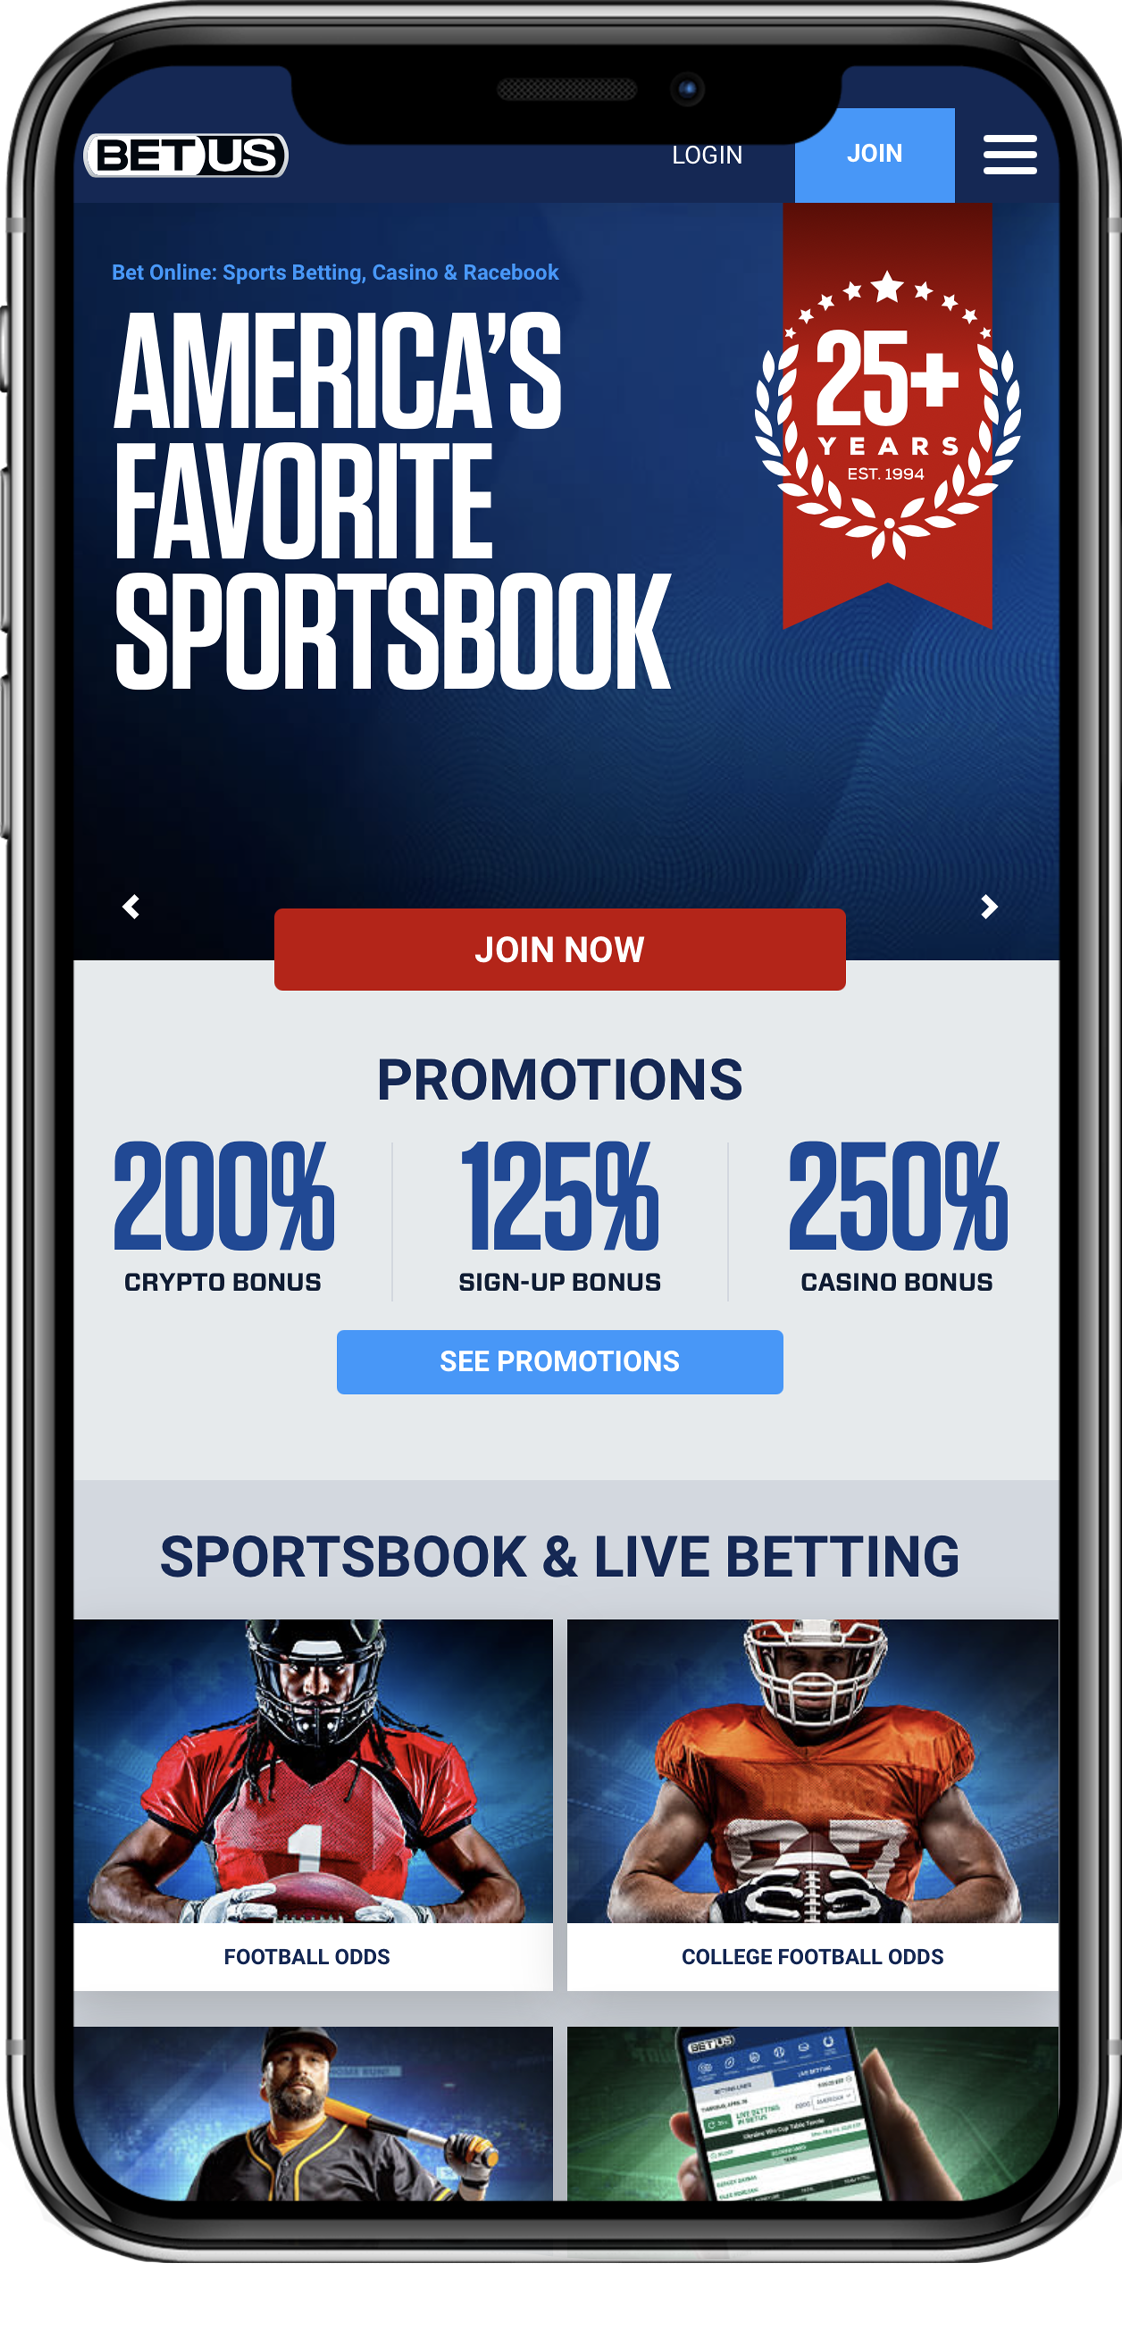 Triple Your Results At 1x Betting App In Half The Time